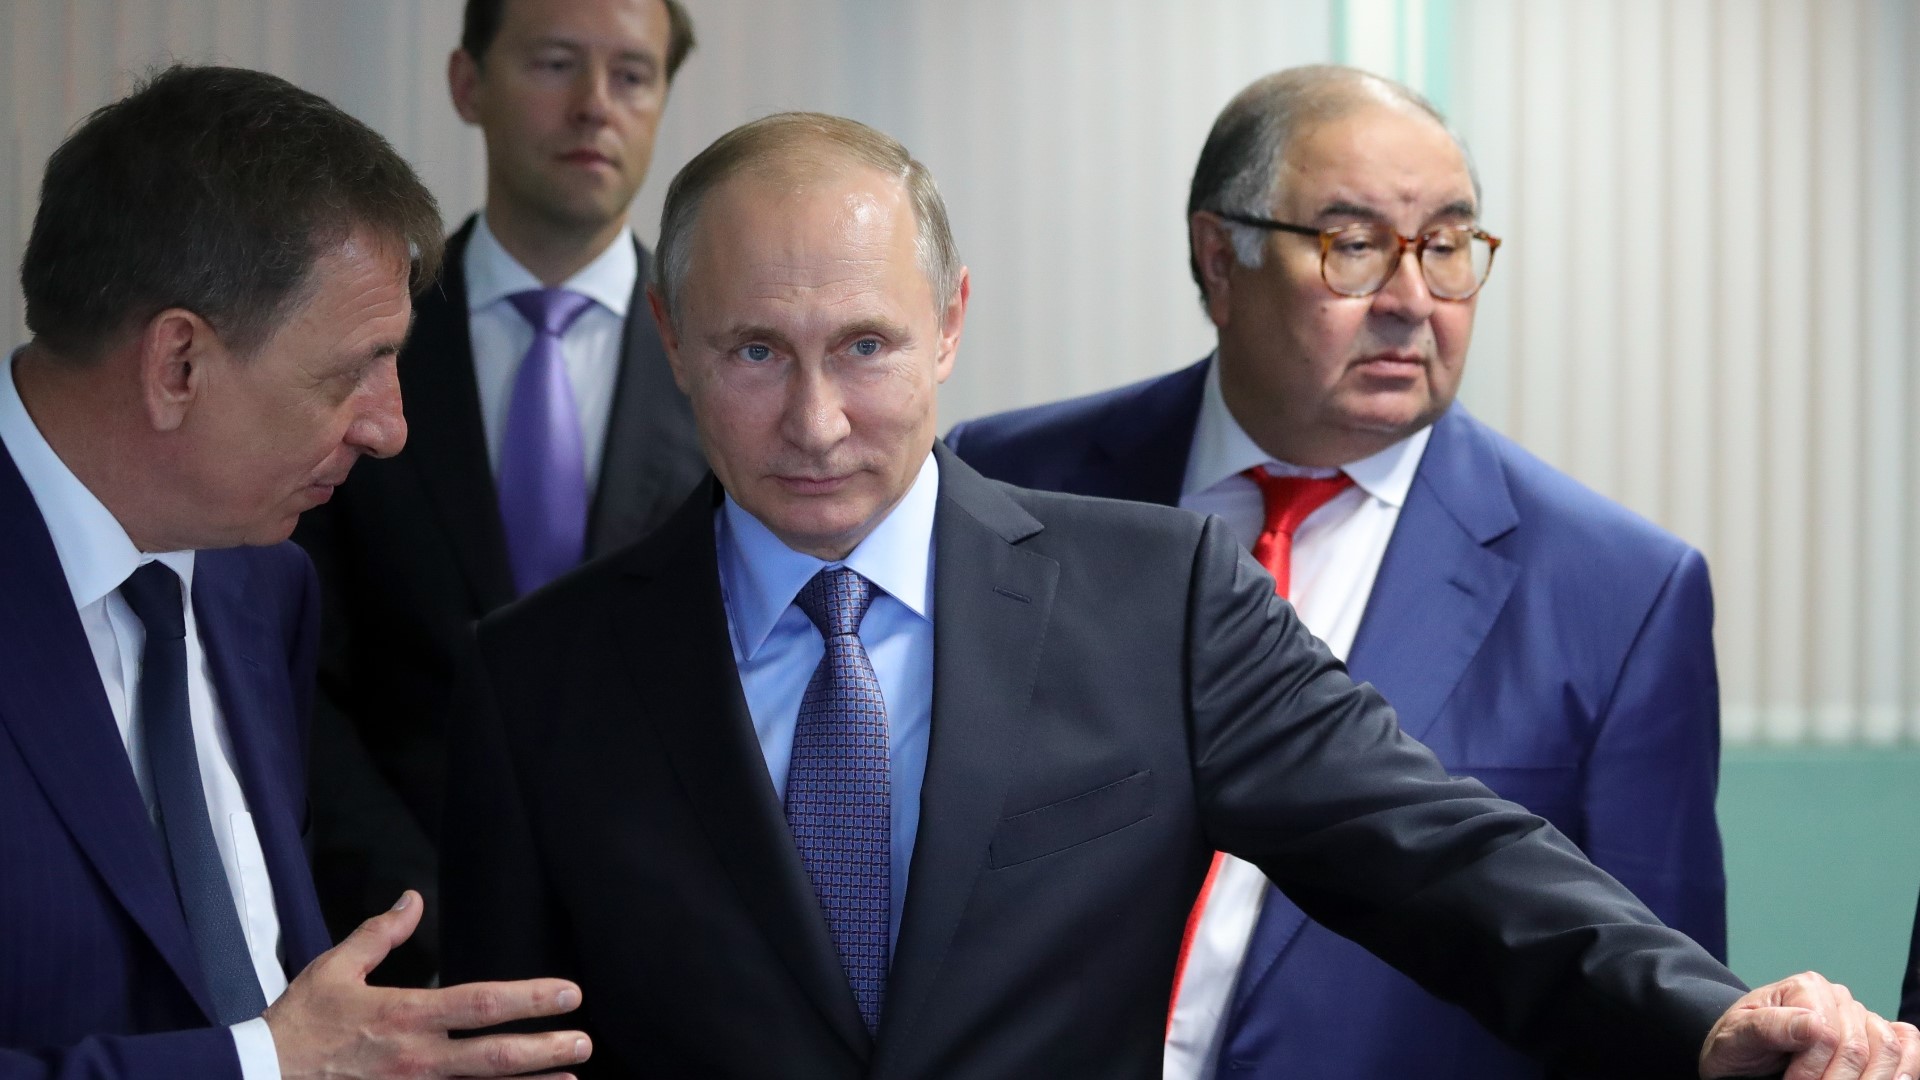 Sanctions have been placed on Putin's press secretary, and wealthy allies of Putin. The State Department has also imposed visa bans on 19 Russian oligarchs.